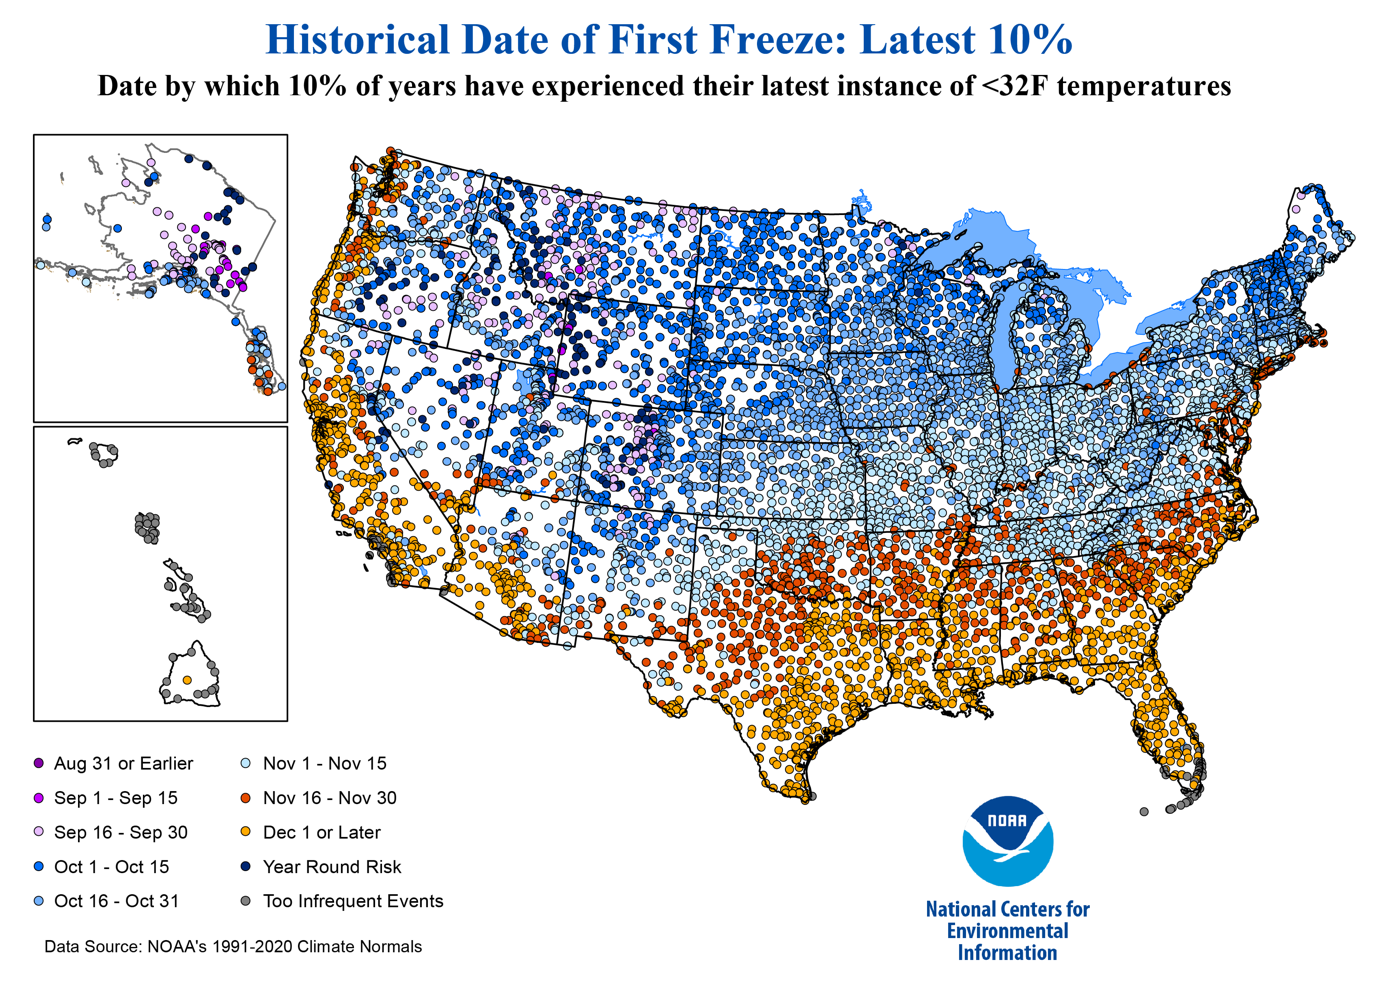 Alt text: A map of the United States with different colored dots and coordinating key to graph the Latest 10% average date of the first fall freeze based on location.